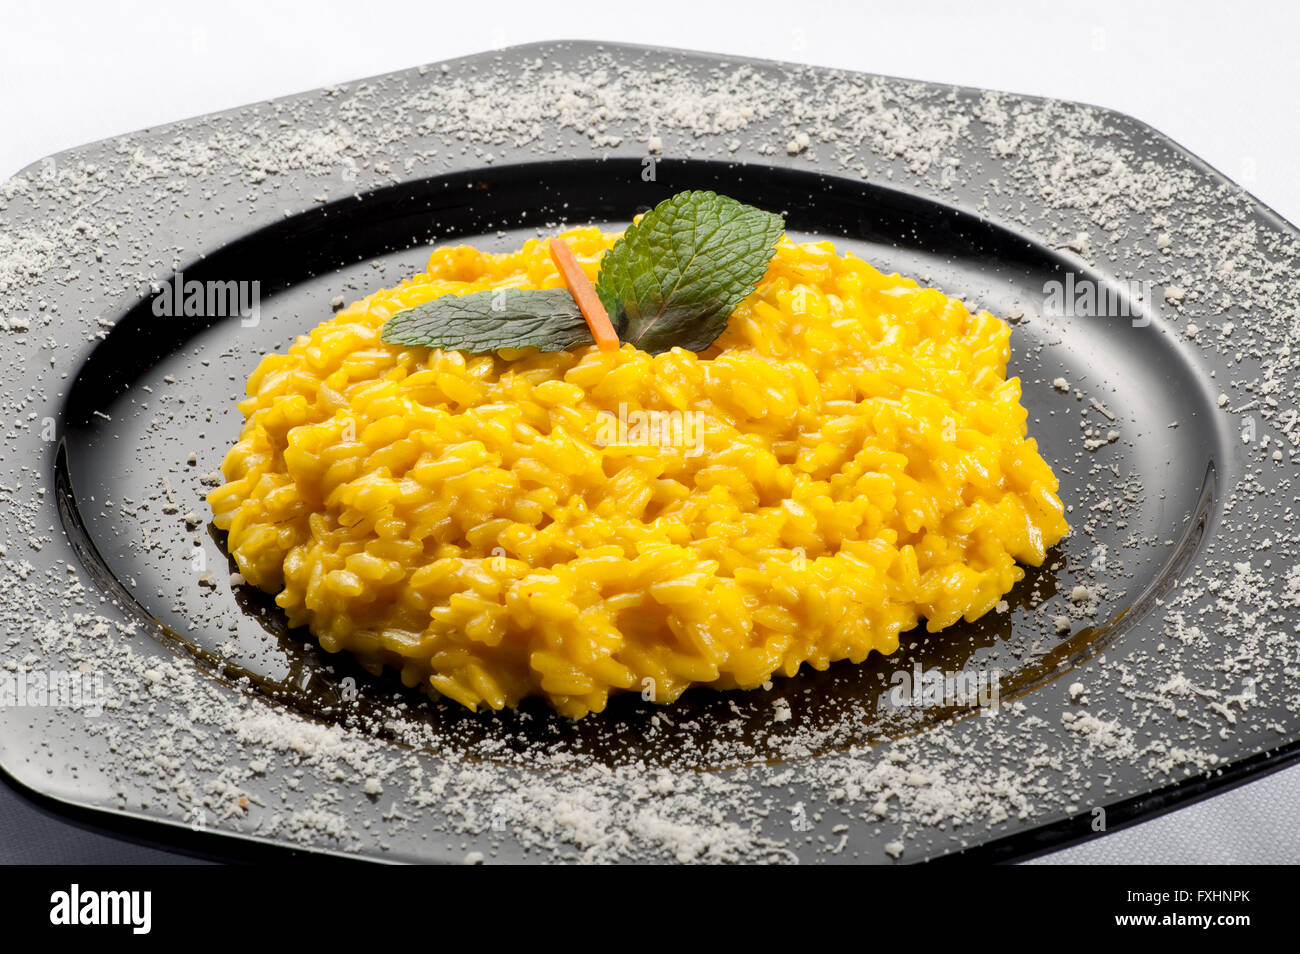 Hexagonal black cast iron plate with yellow risotto rice and carrot mint garnish on top Stock Photo